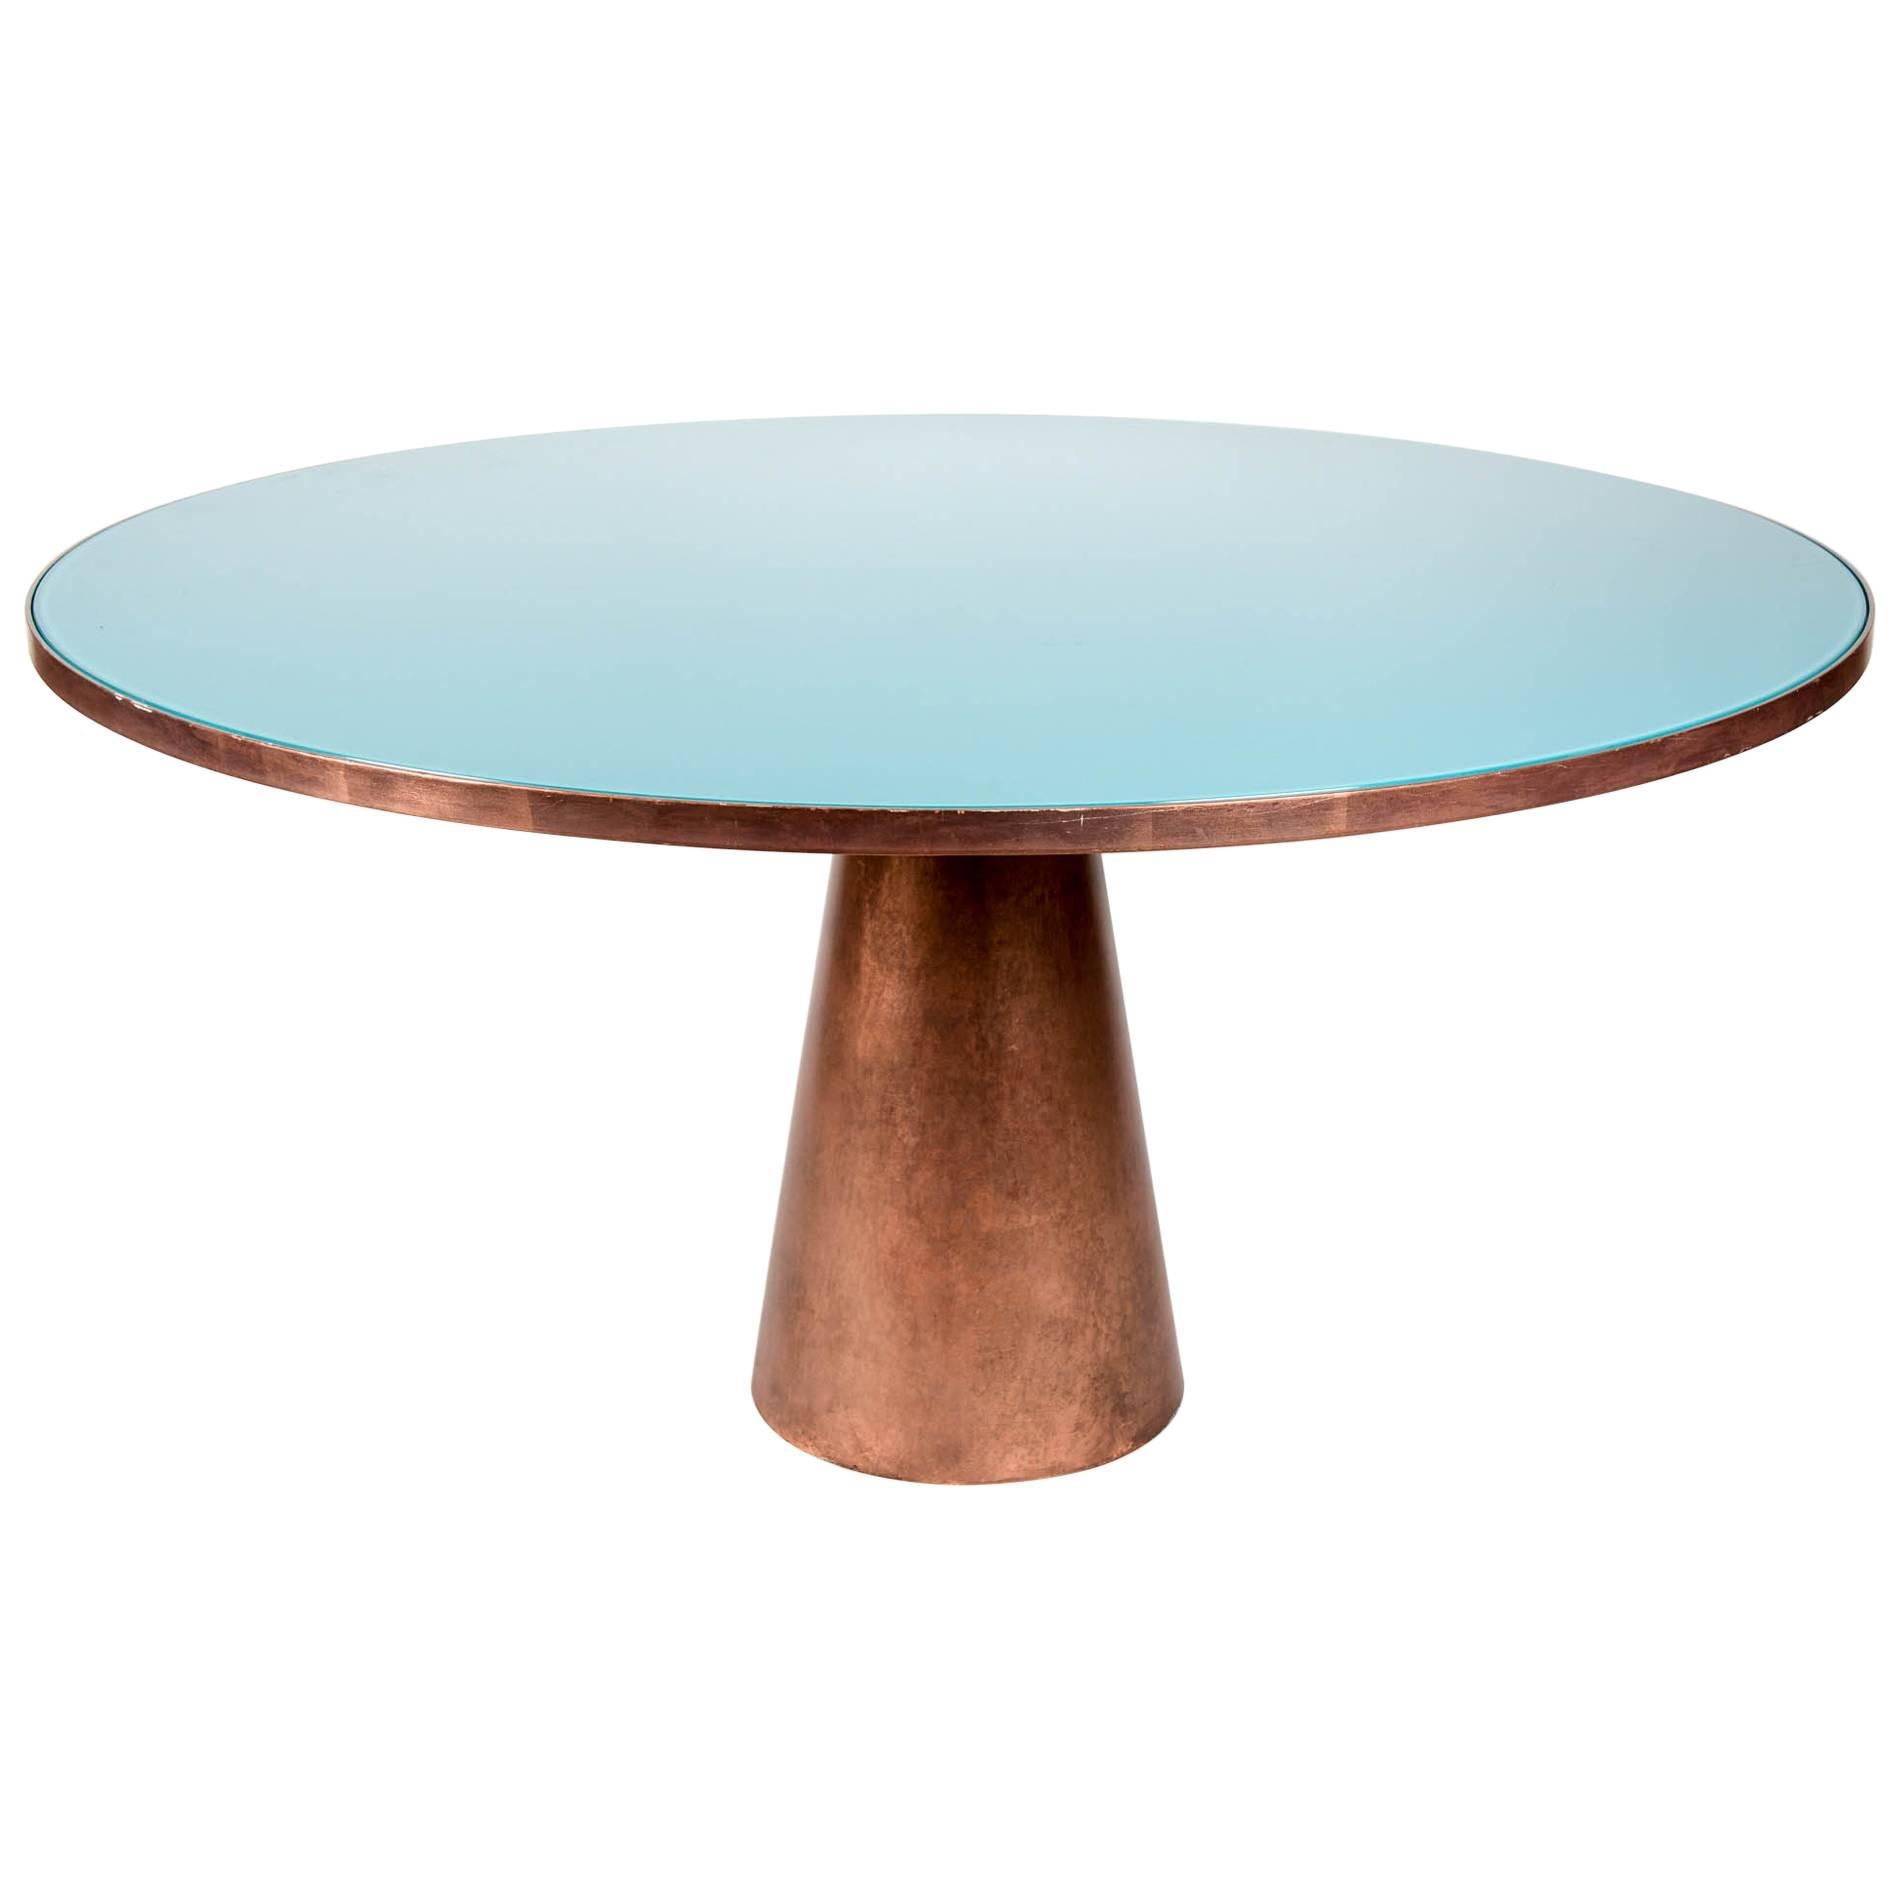 Round table at cost price.